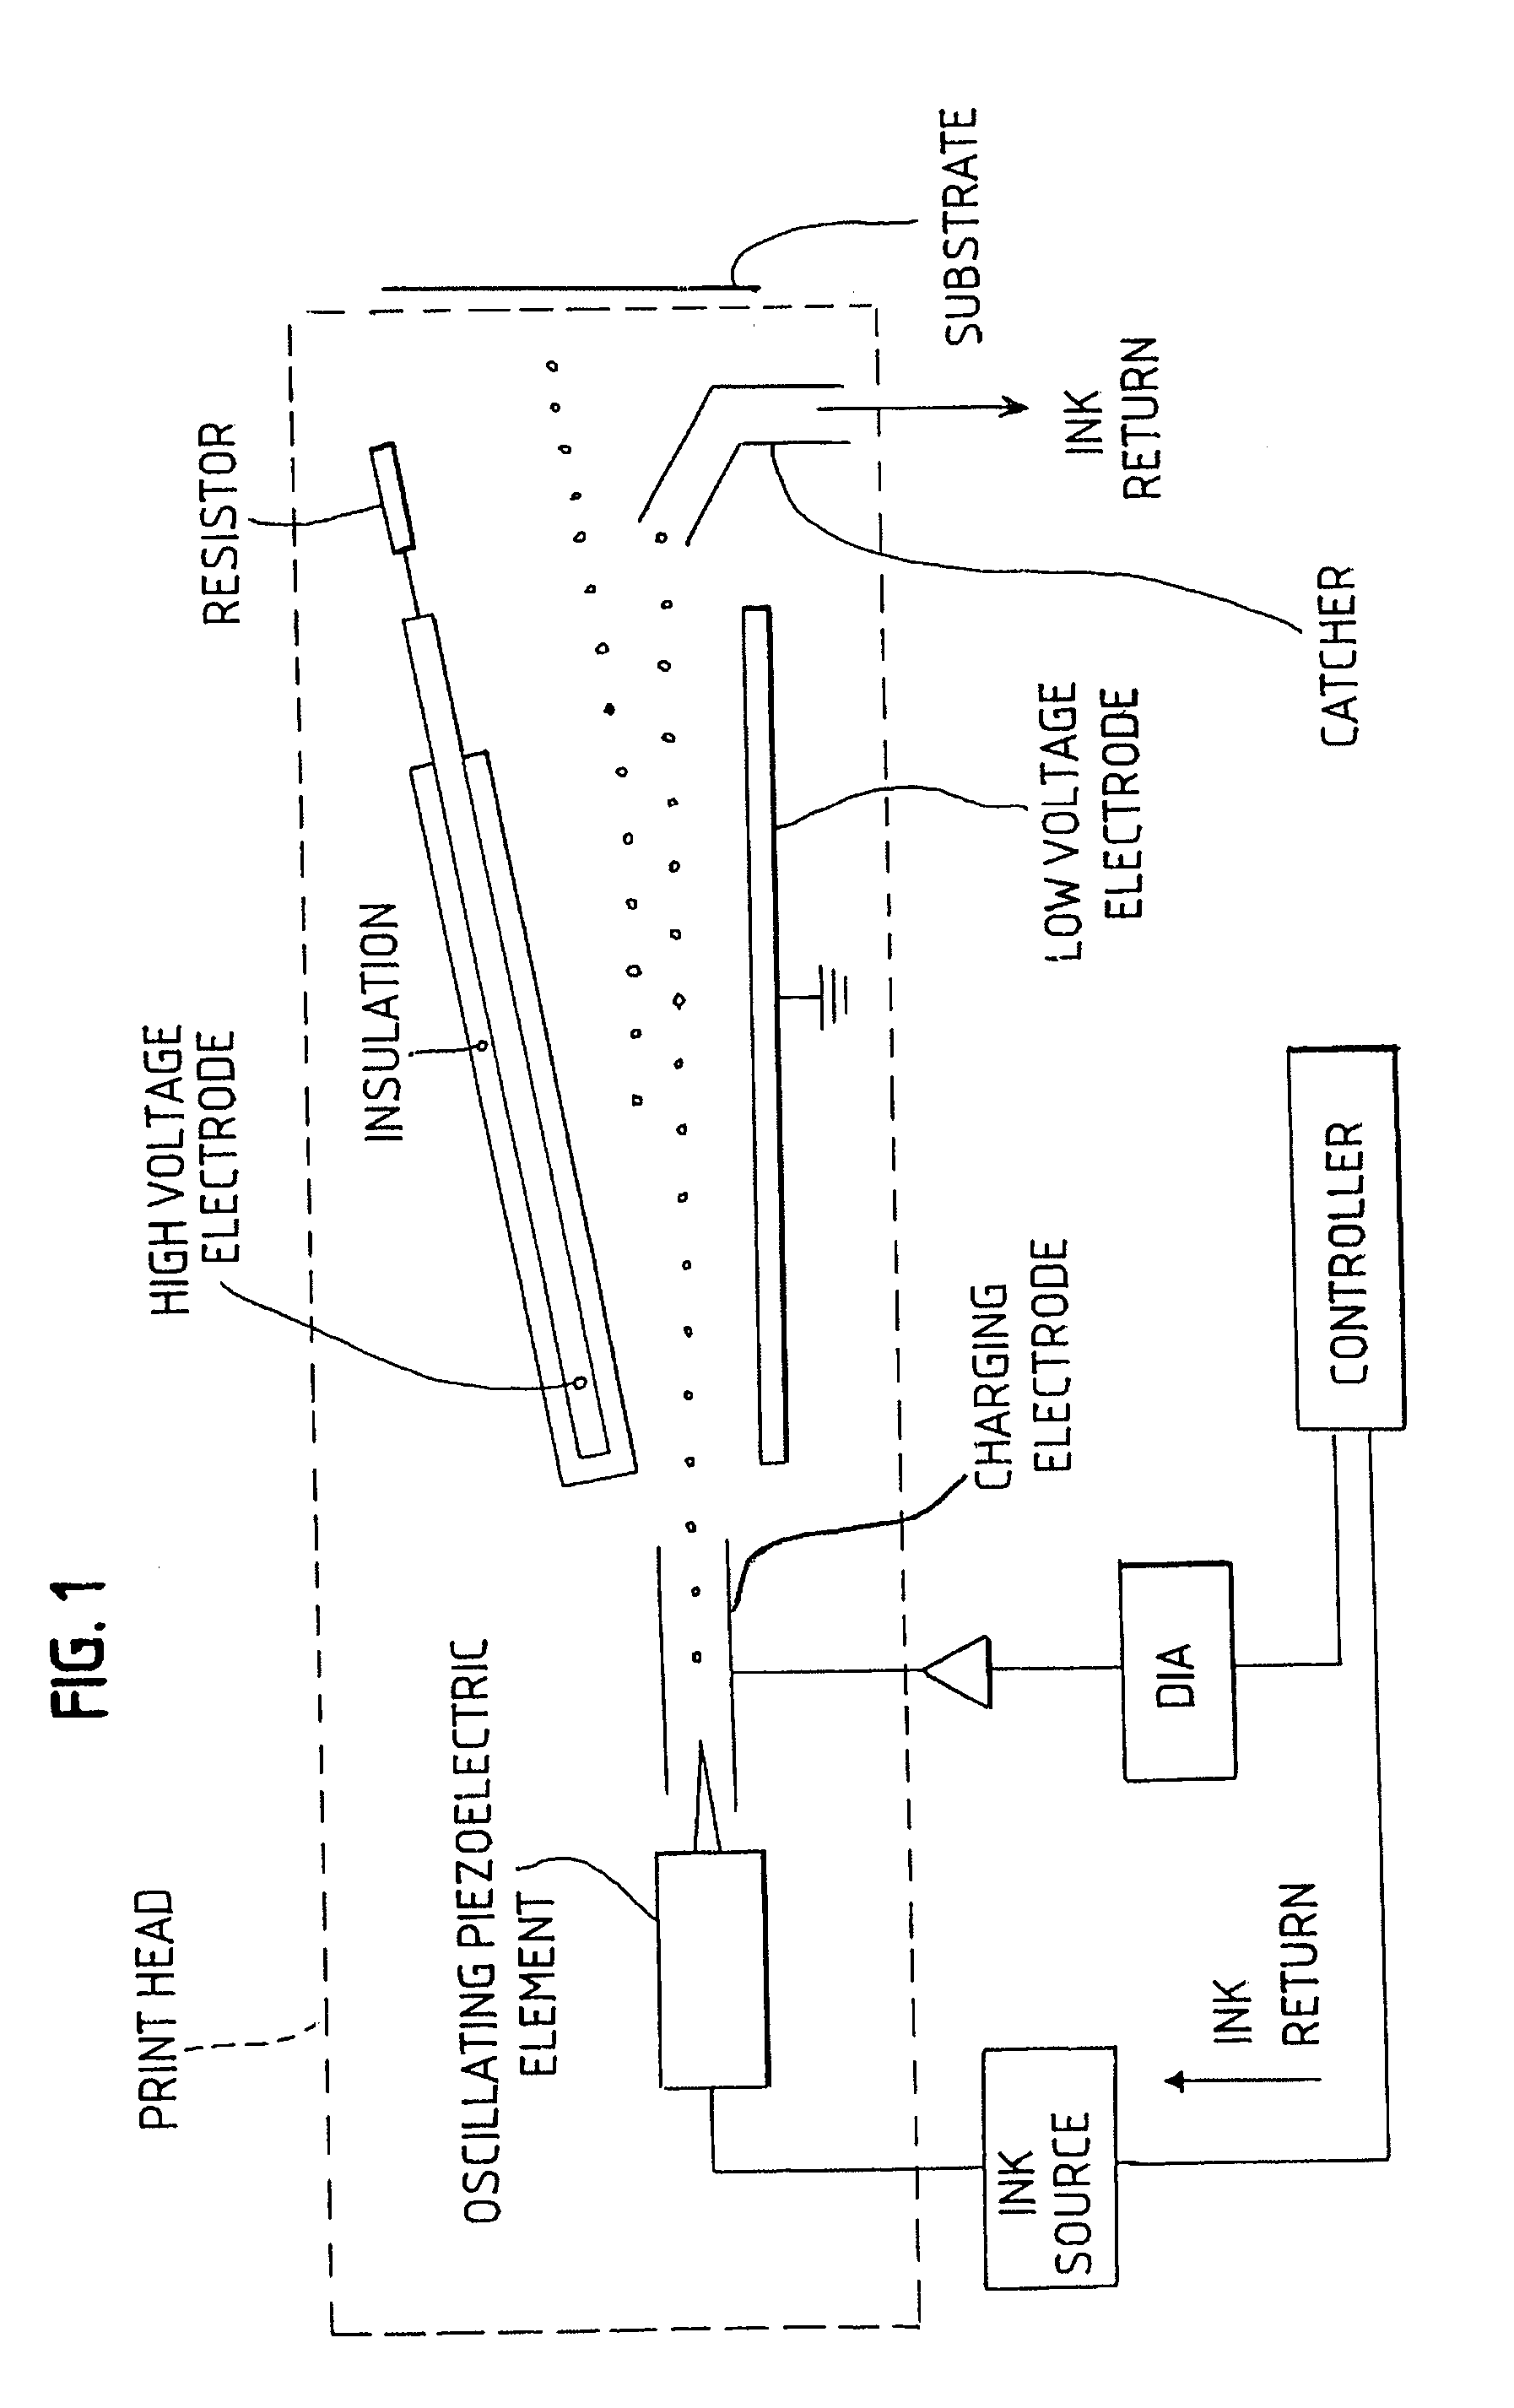 High voltage arm assembly with integrated resistor, automatic high voltage deflection electrode locator, and special insulation